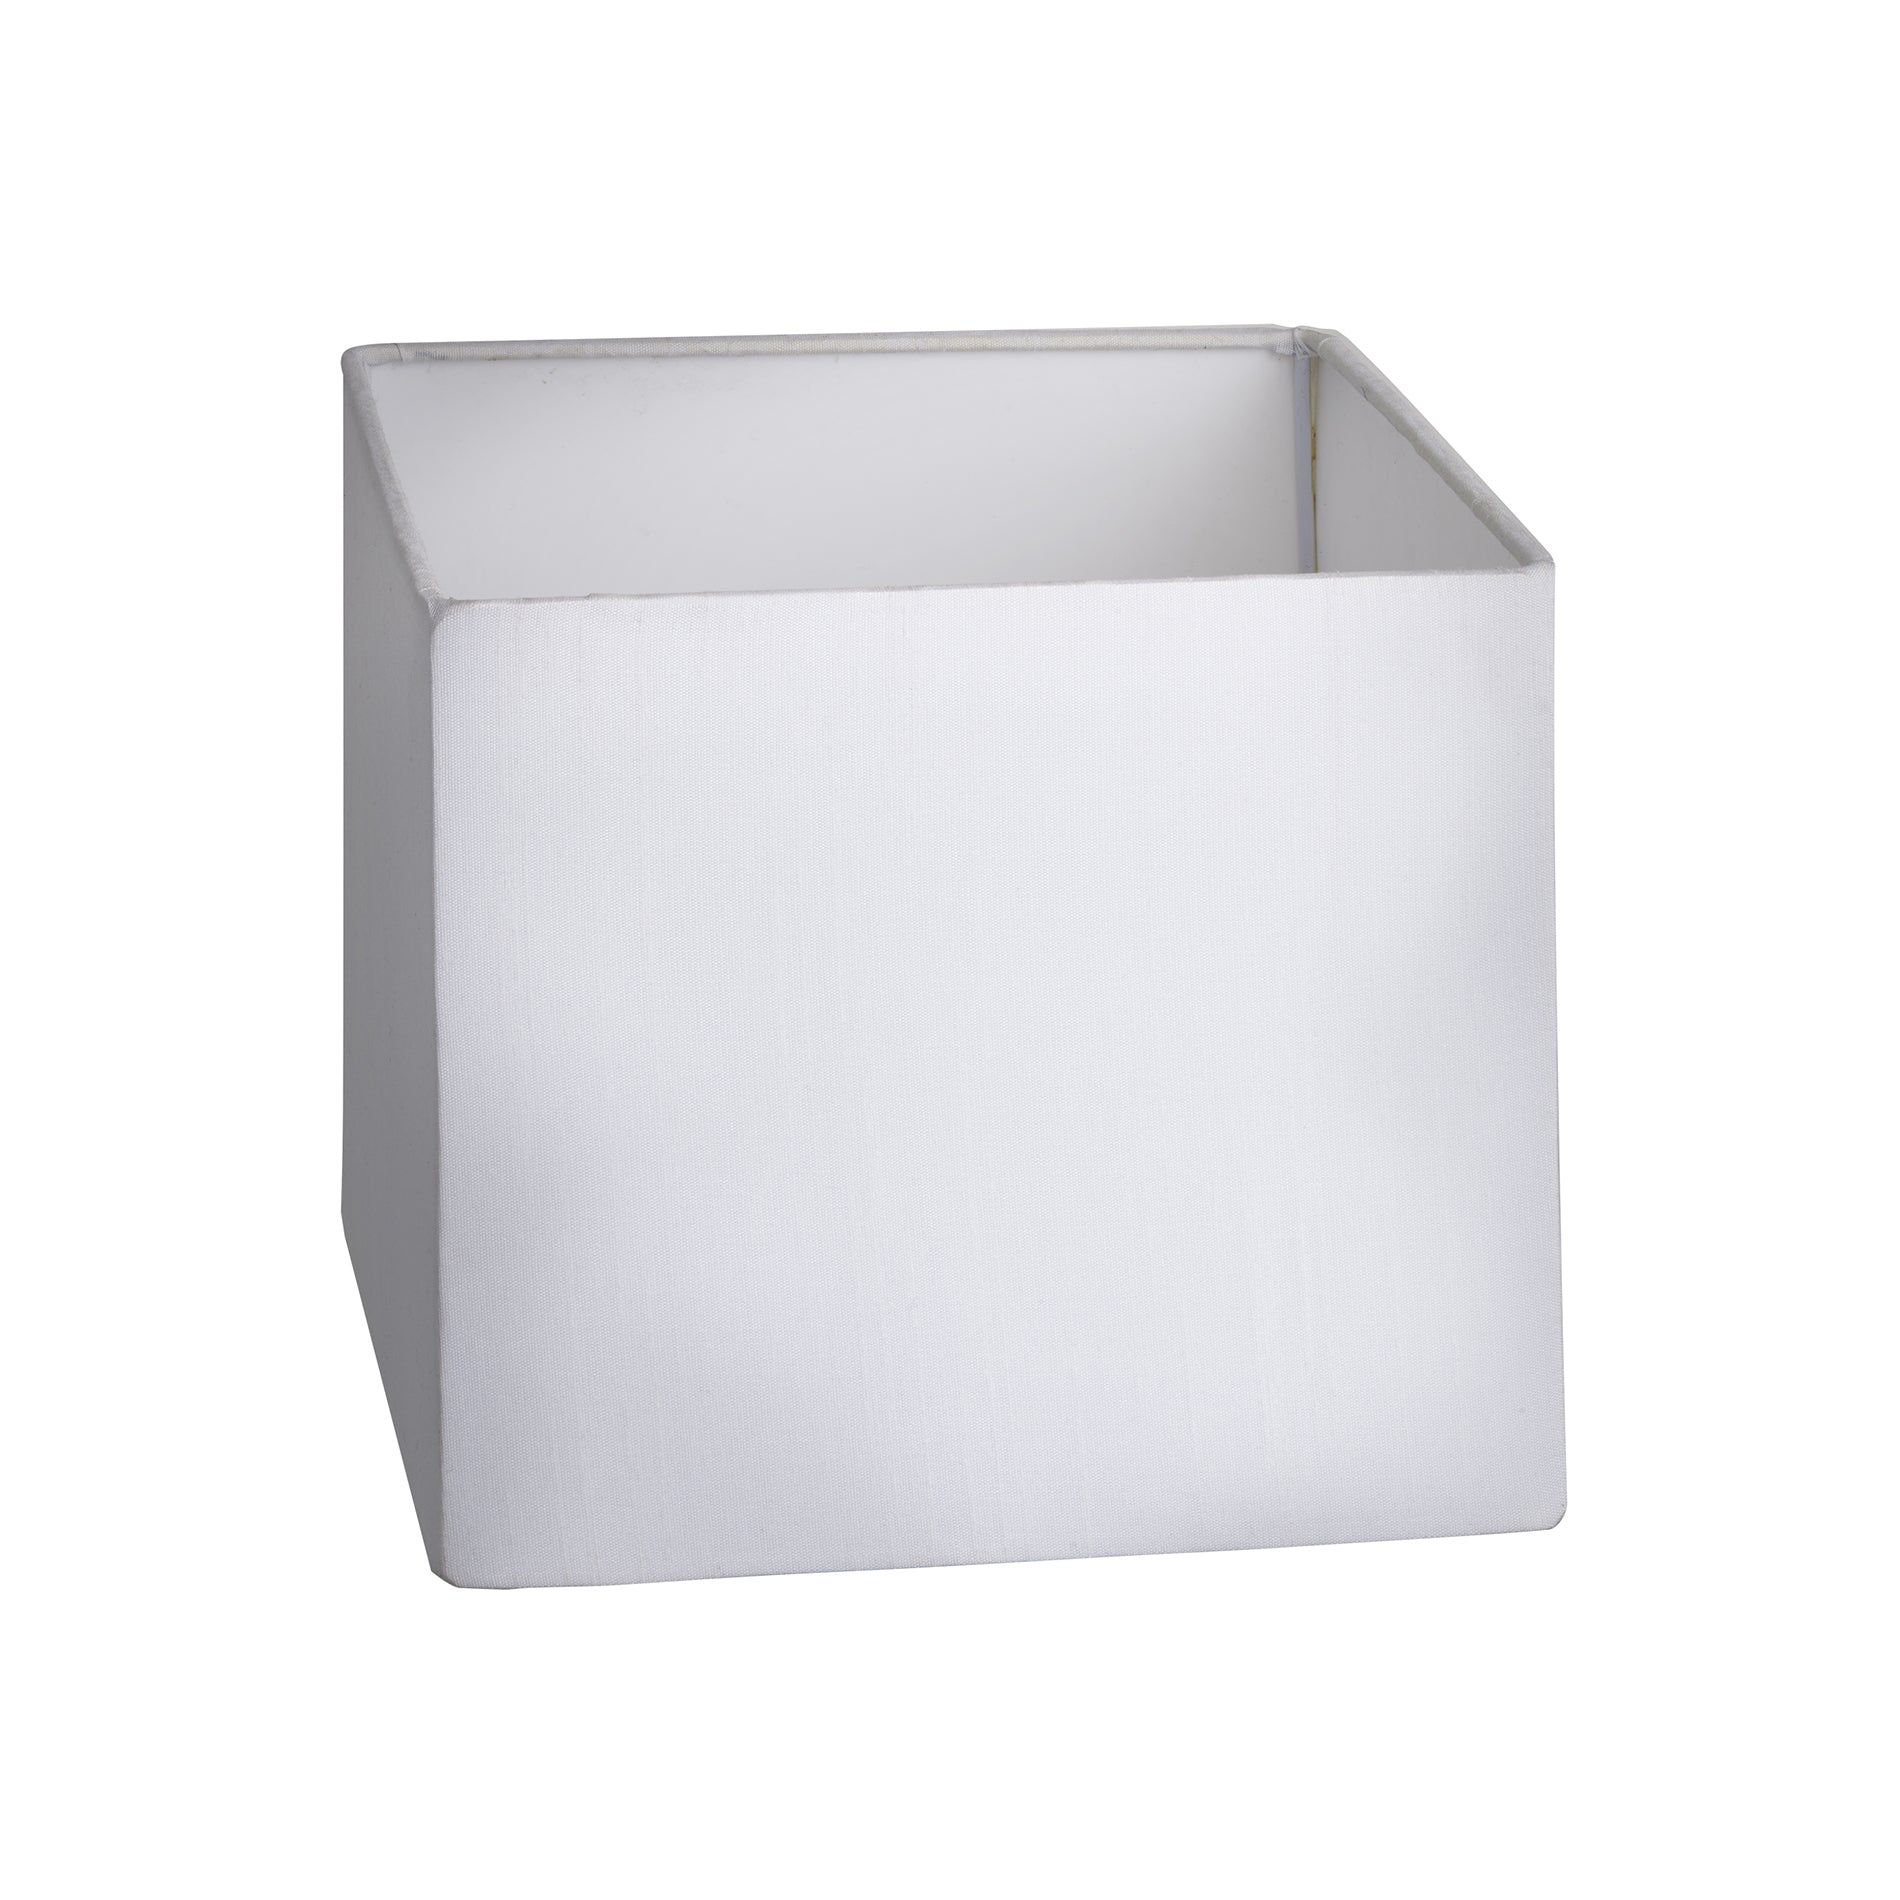 Cube - Small - White Dupion Silk - Lampshade Only Industville CU-S-WDS-LSO